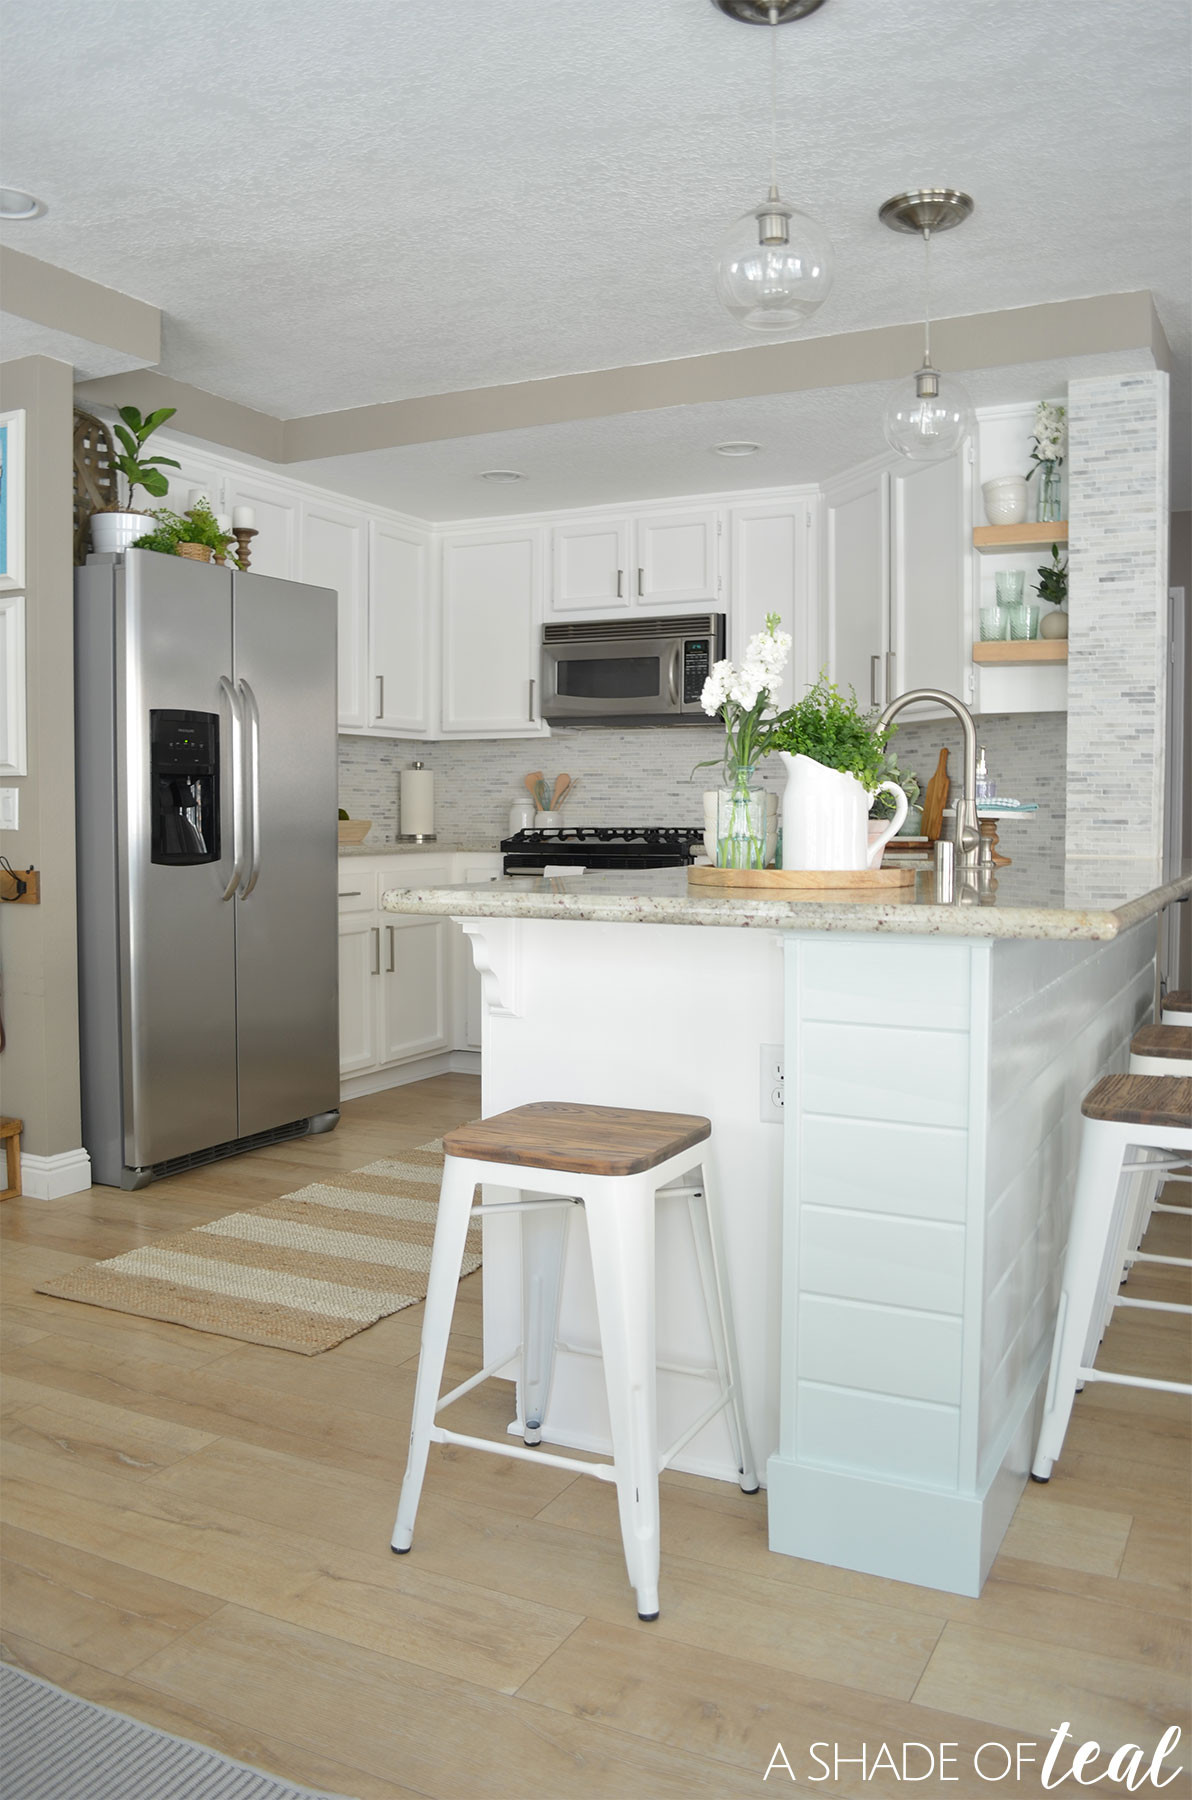 Rustic Painted Kitchen Cabinets
 Paint Colors used in my Modern Rustic Home